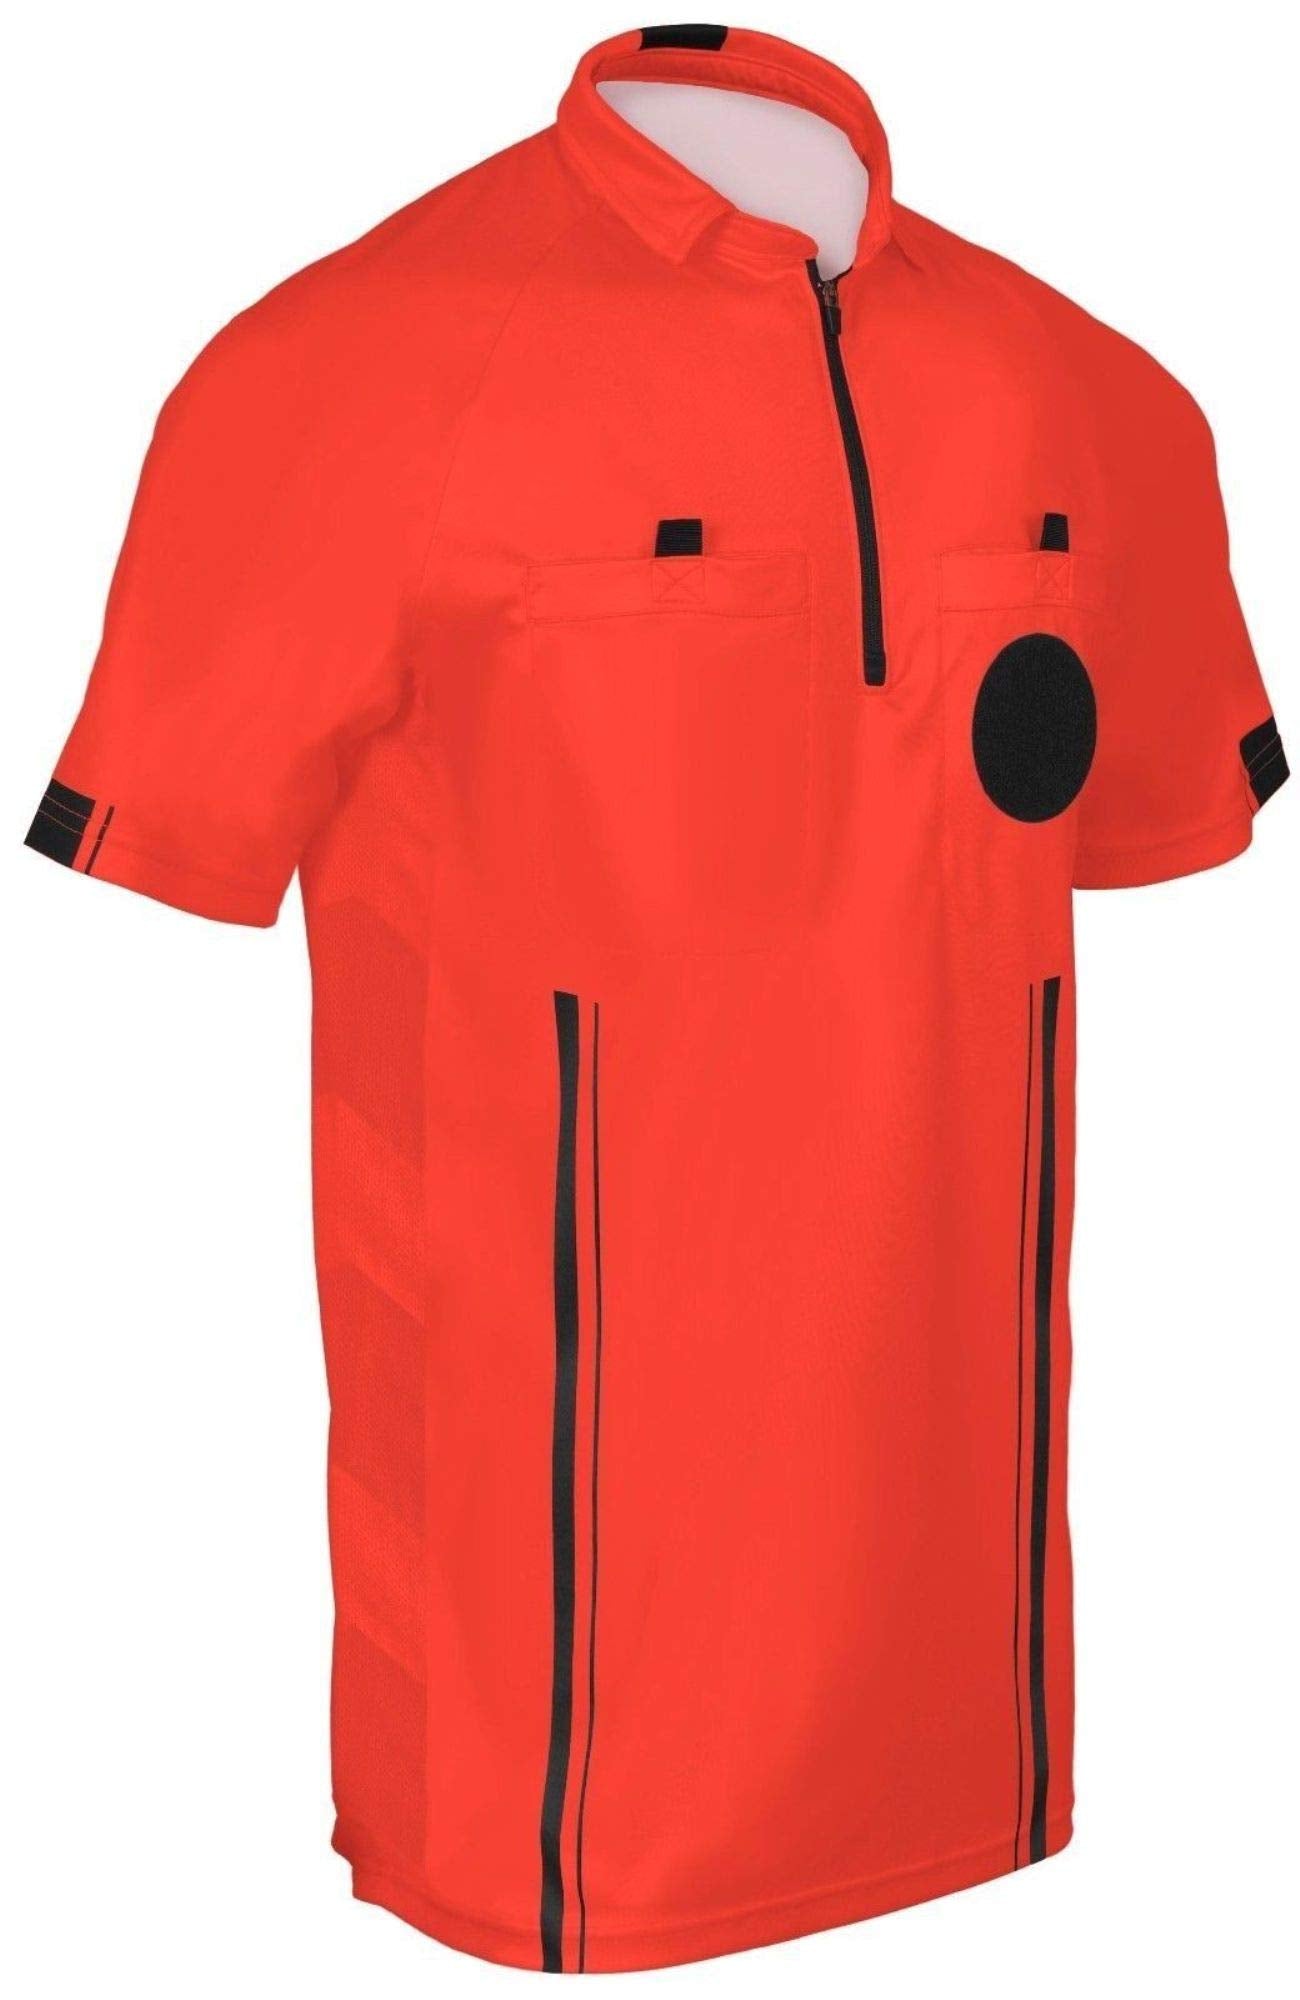 1 Stop Soccer Official Referee Soccer Jersey with Velcro